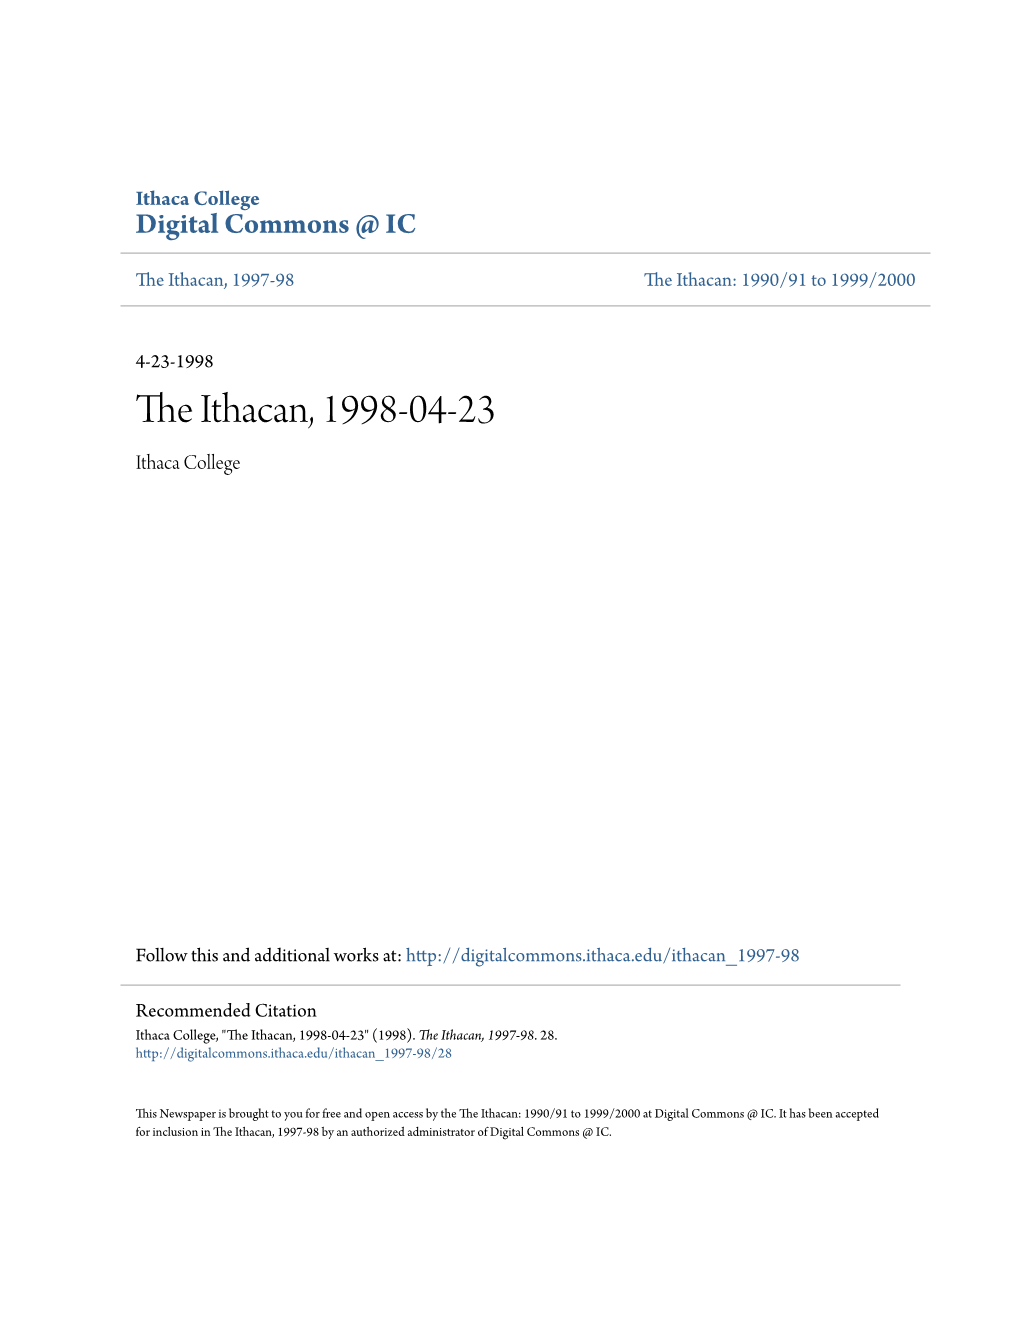 The Ithacan, 1998-04-23